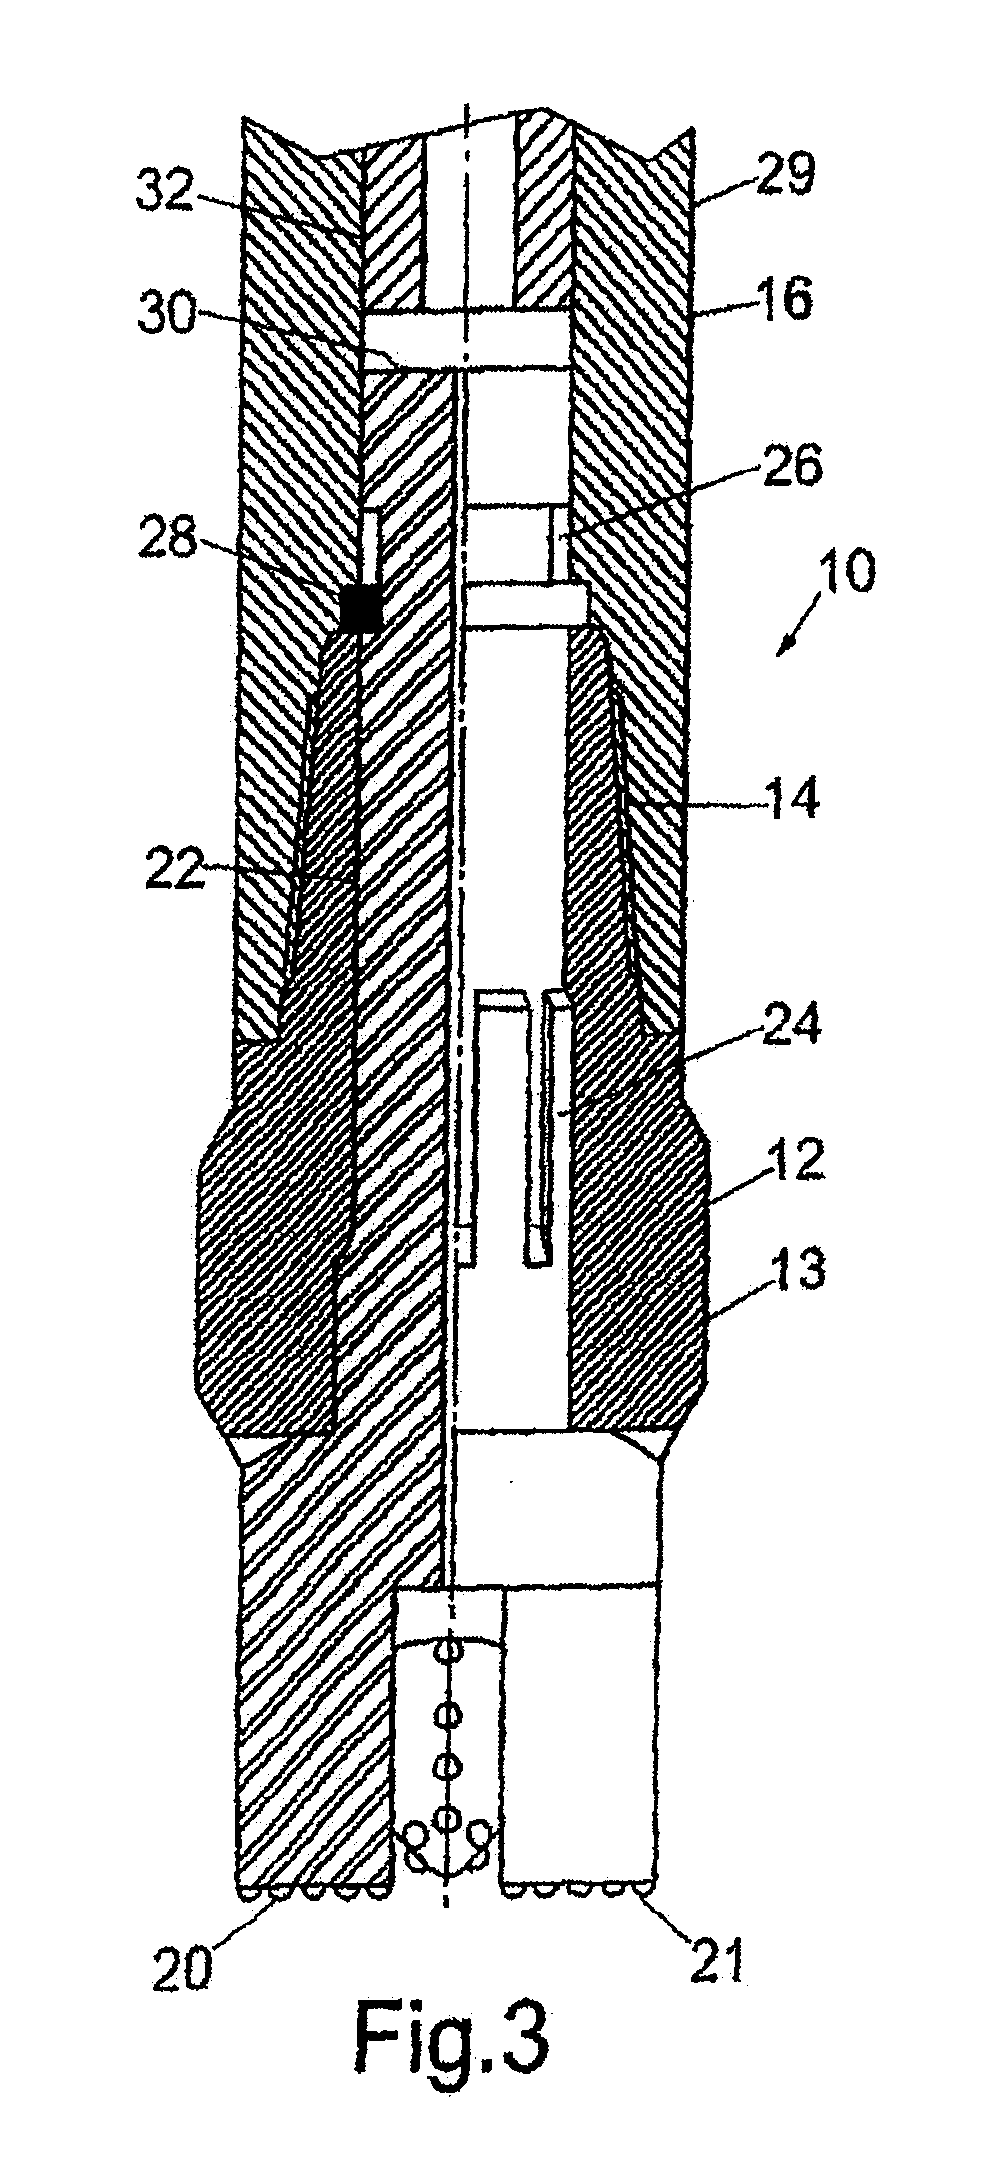 Drilling apparatus with percussive action cutter